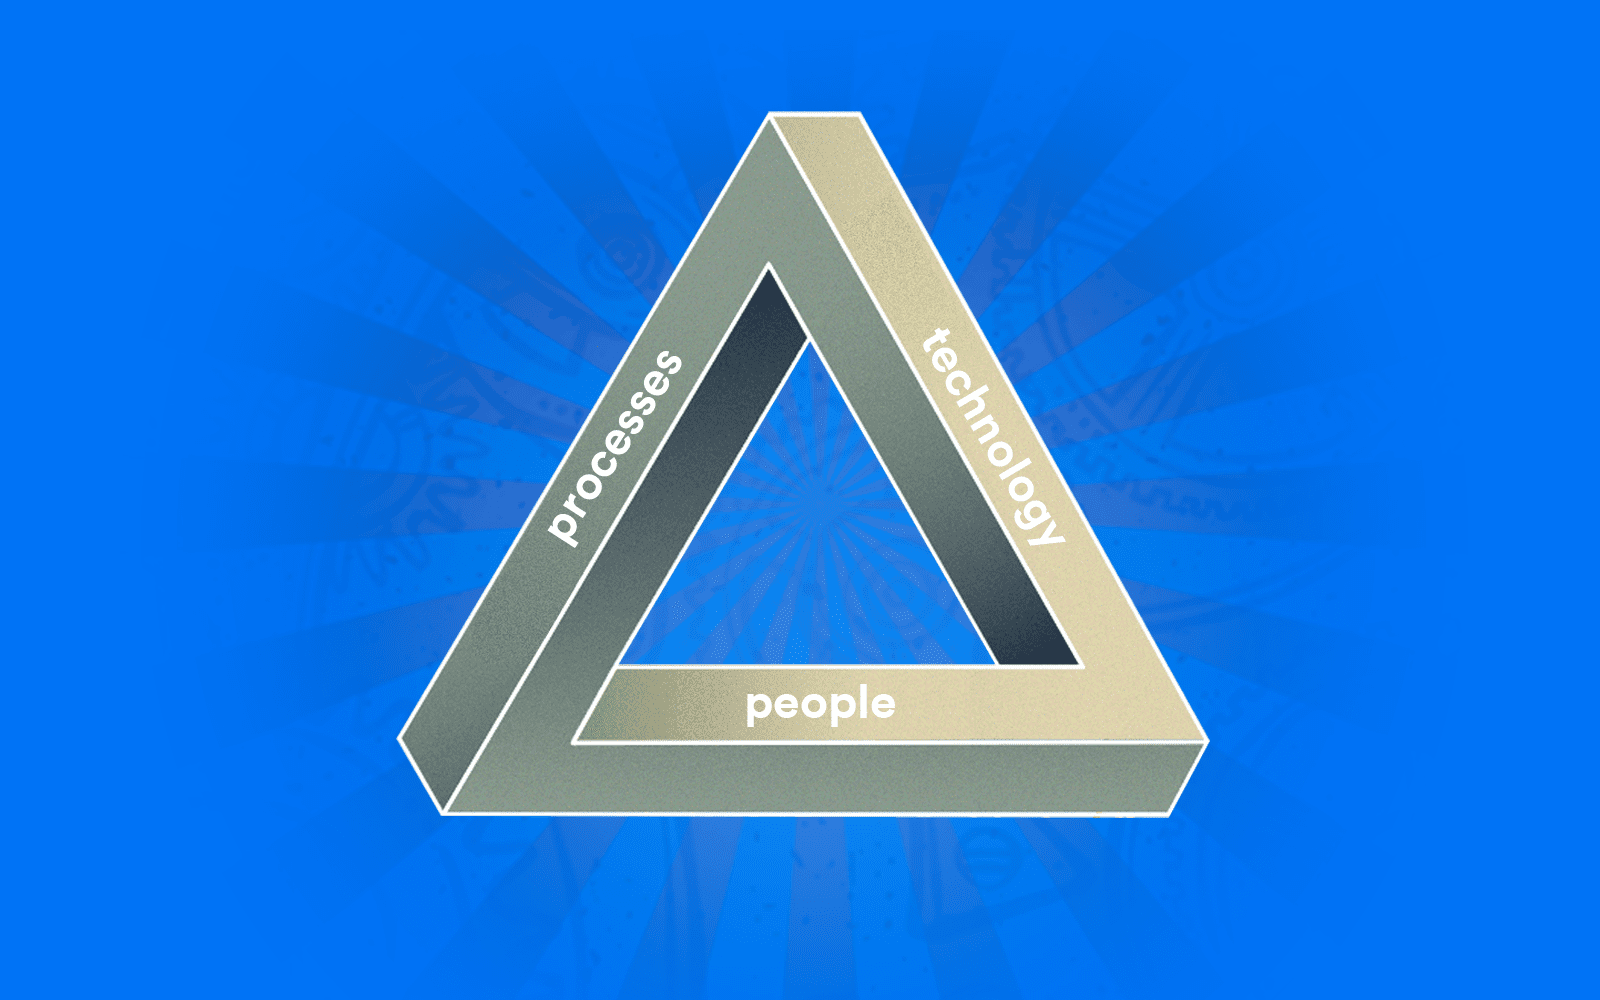 Creative Operations consists of 3 pillars: People. processes and technology